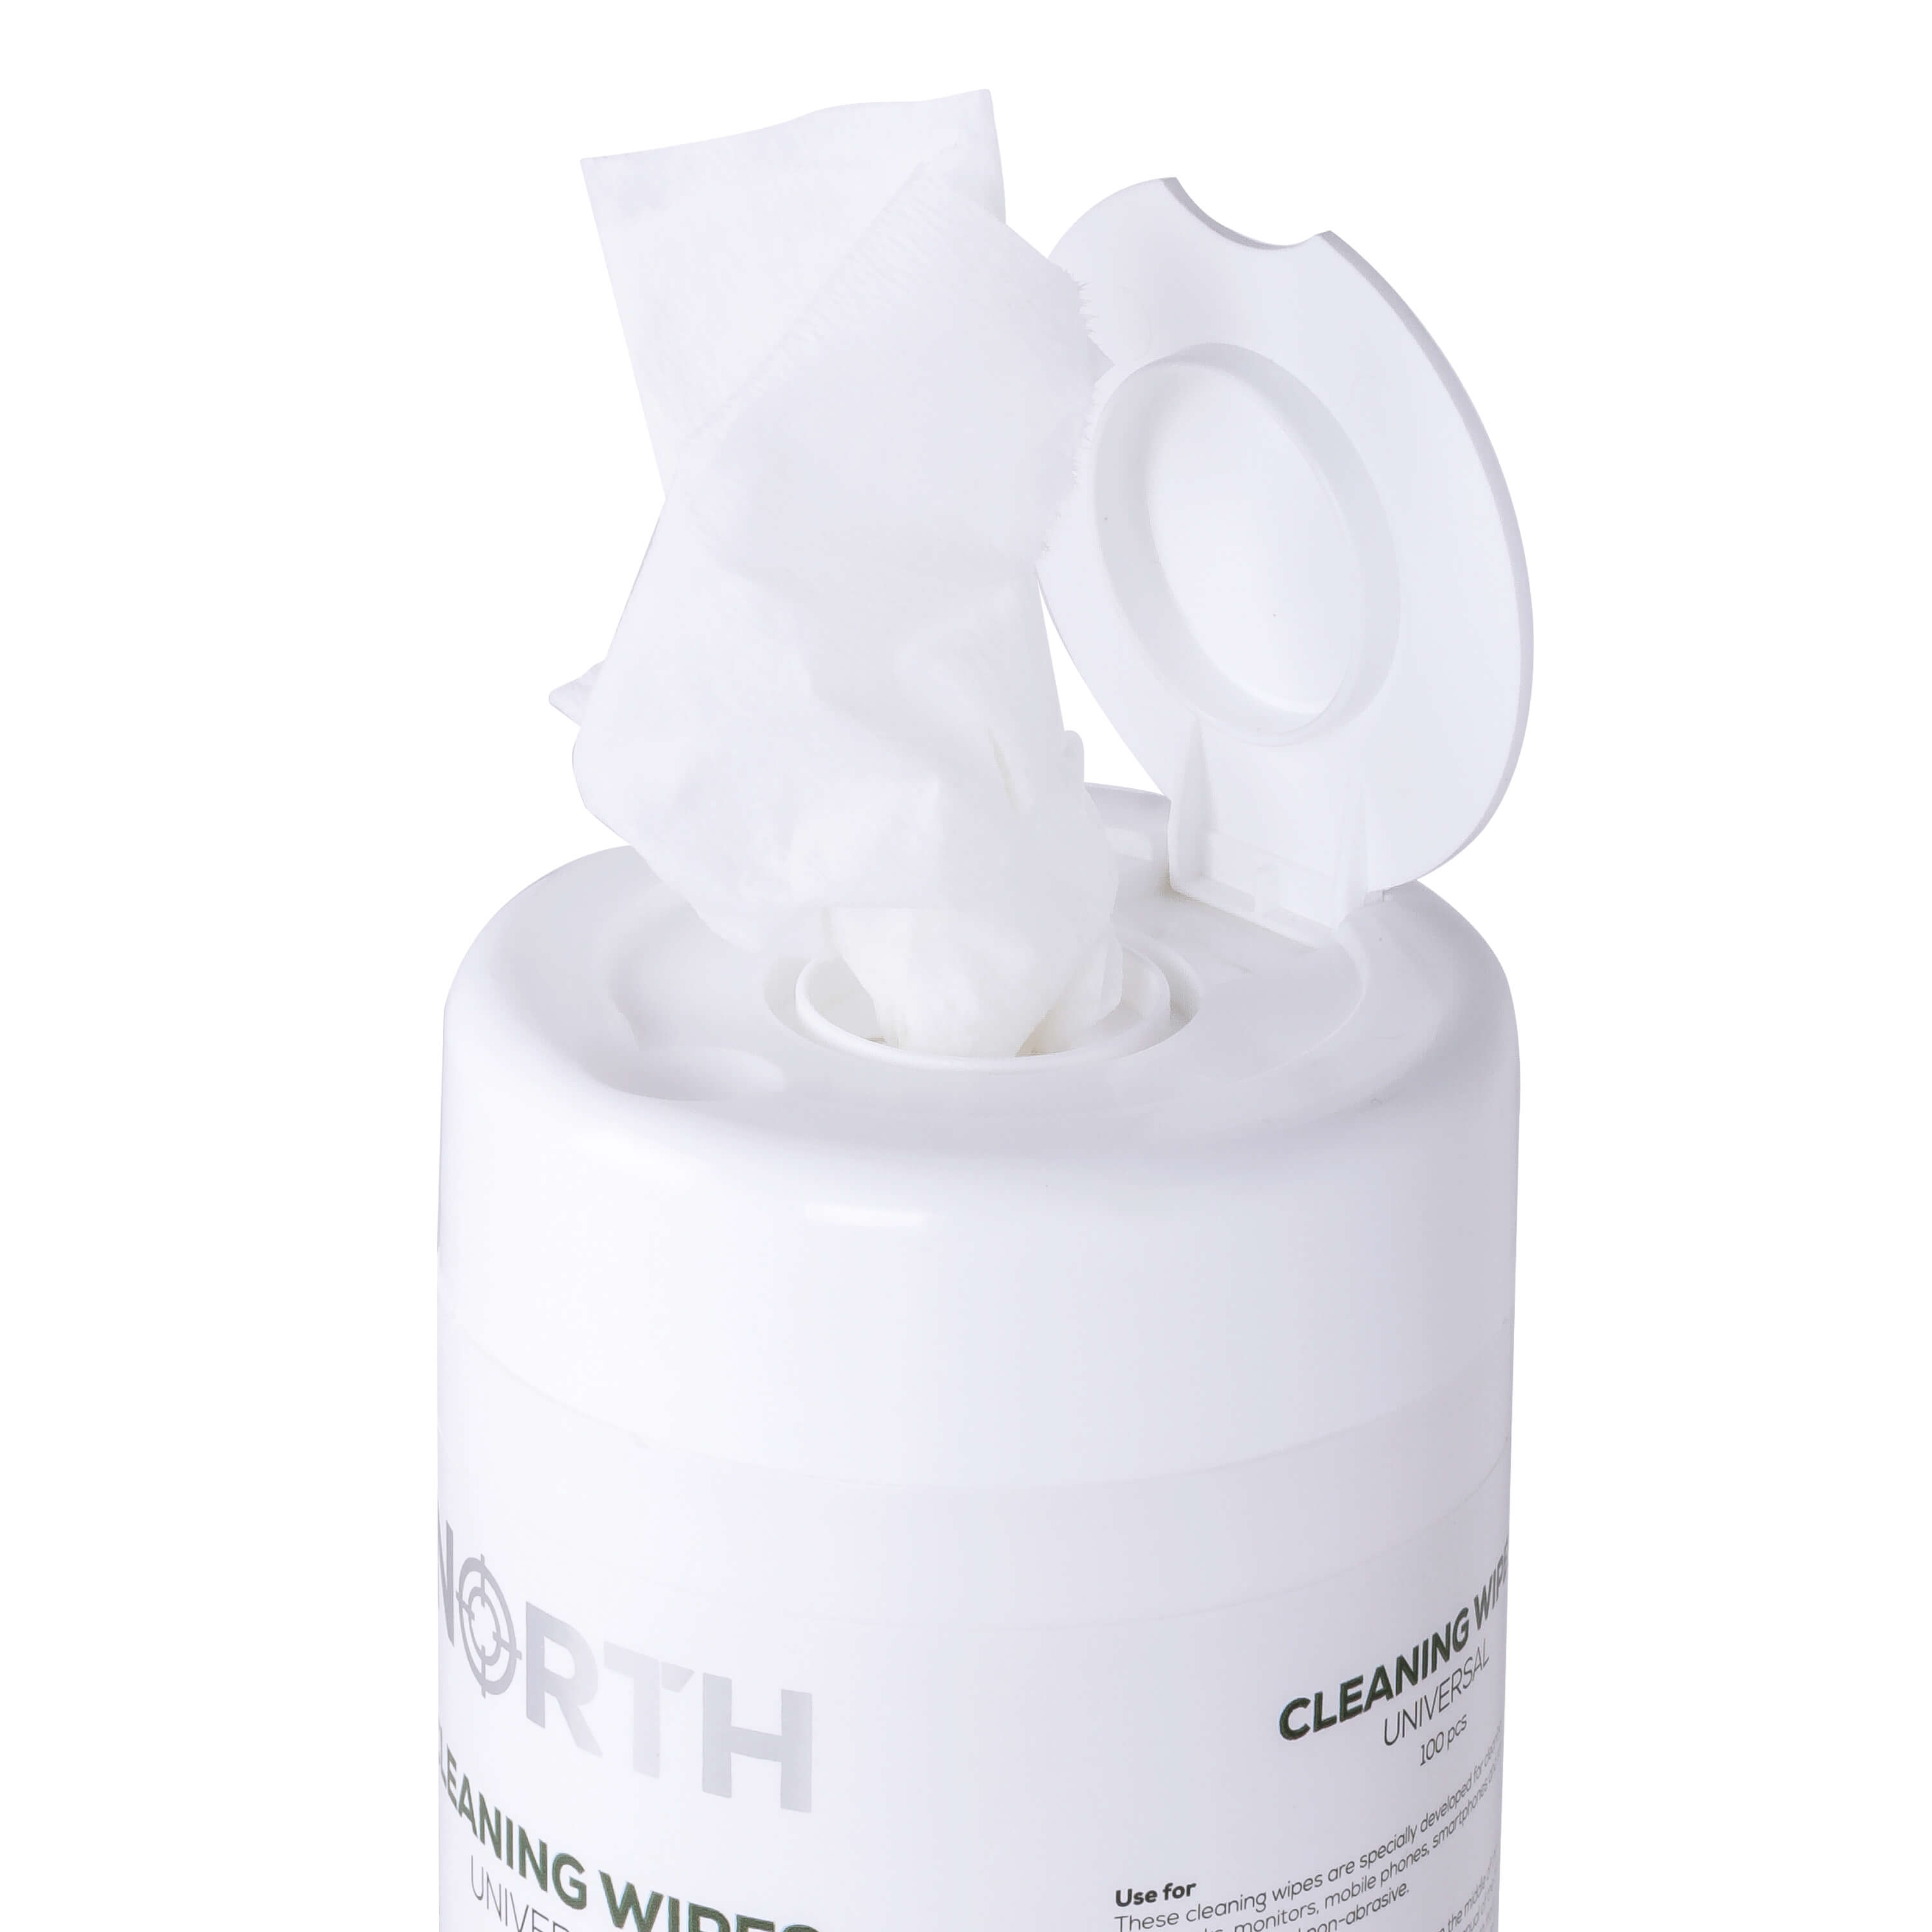 Cleaning Wipes - Universal